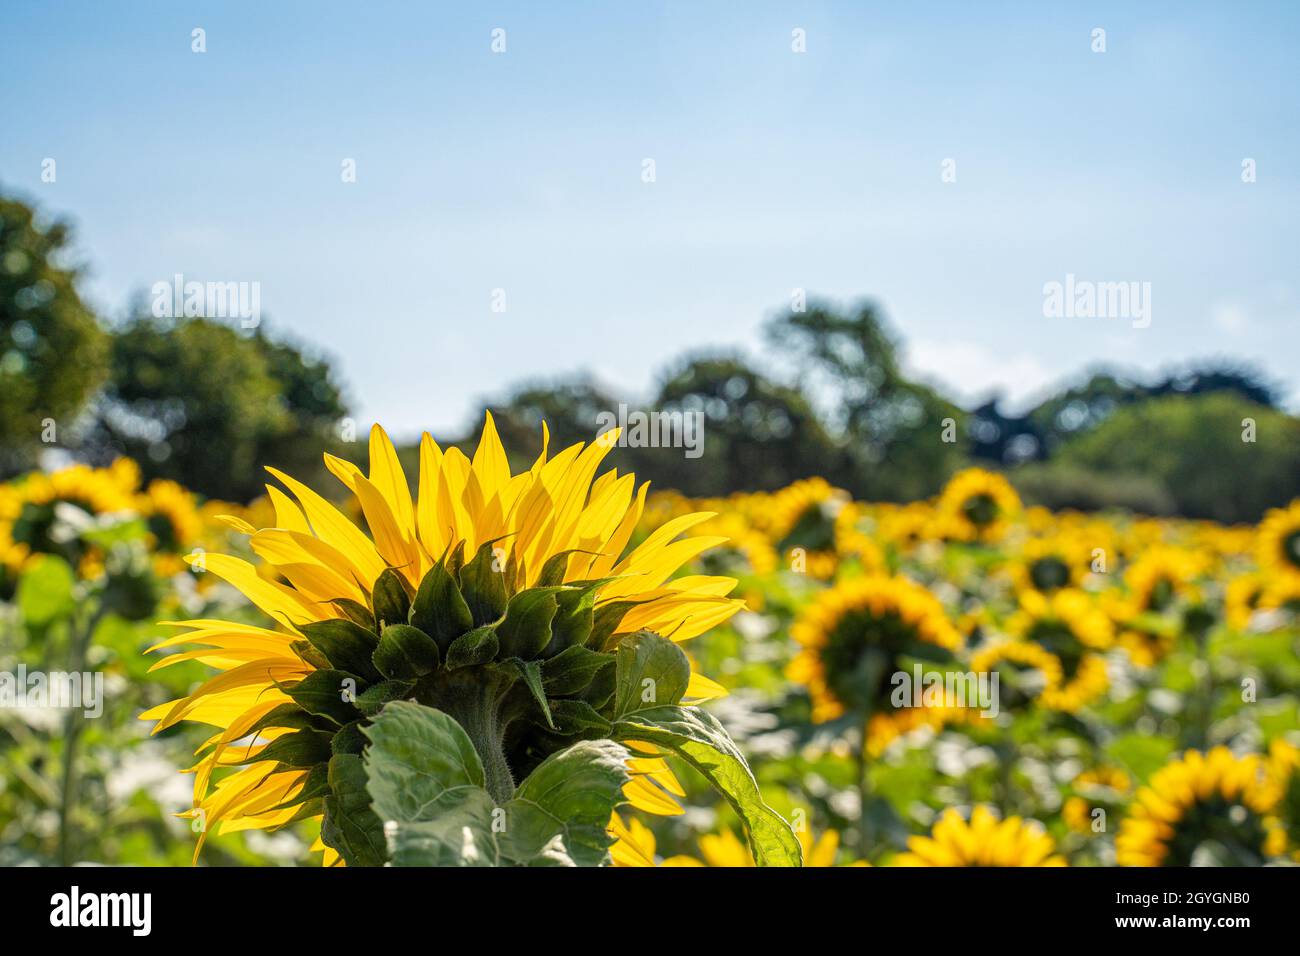 Sunflower field on a bright sunny day in summer Stock Photo